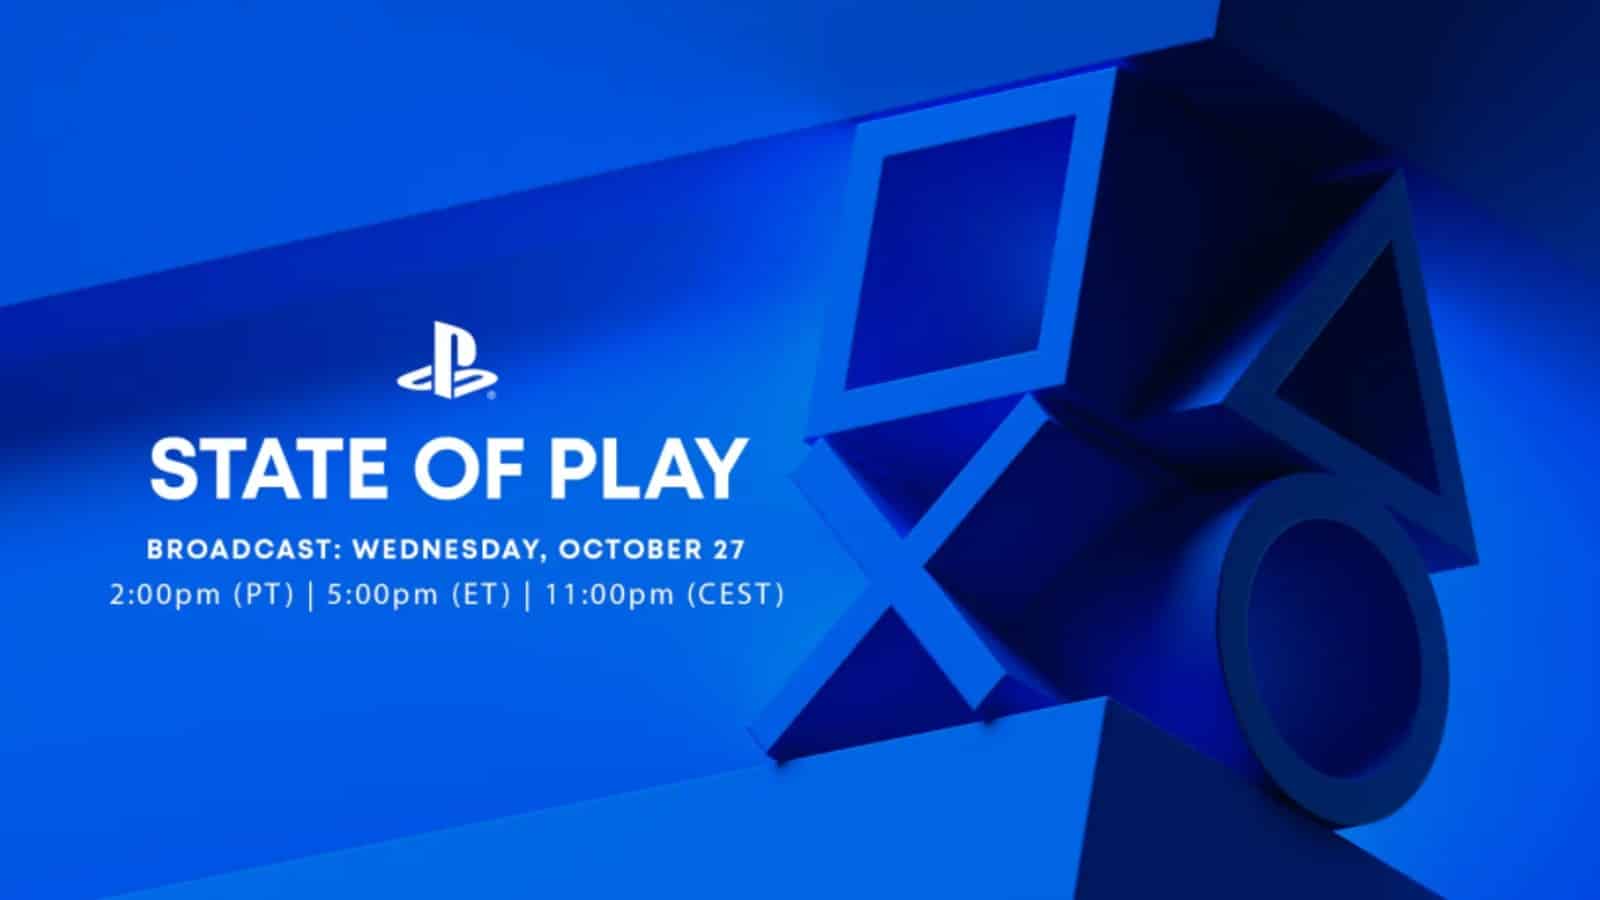 How to watch Sony's PS5 Showcase event: Start time, stream, more - Dexerto